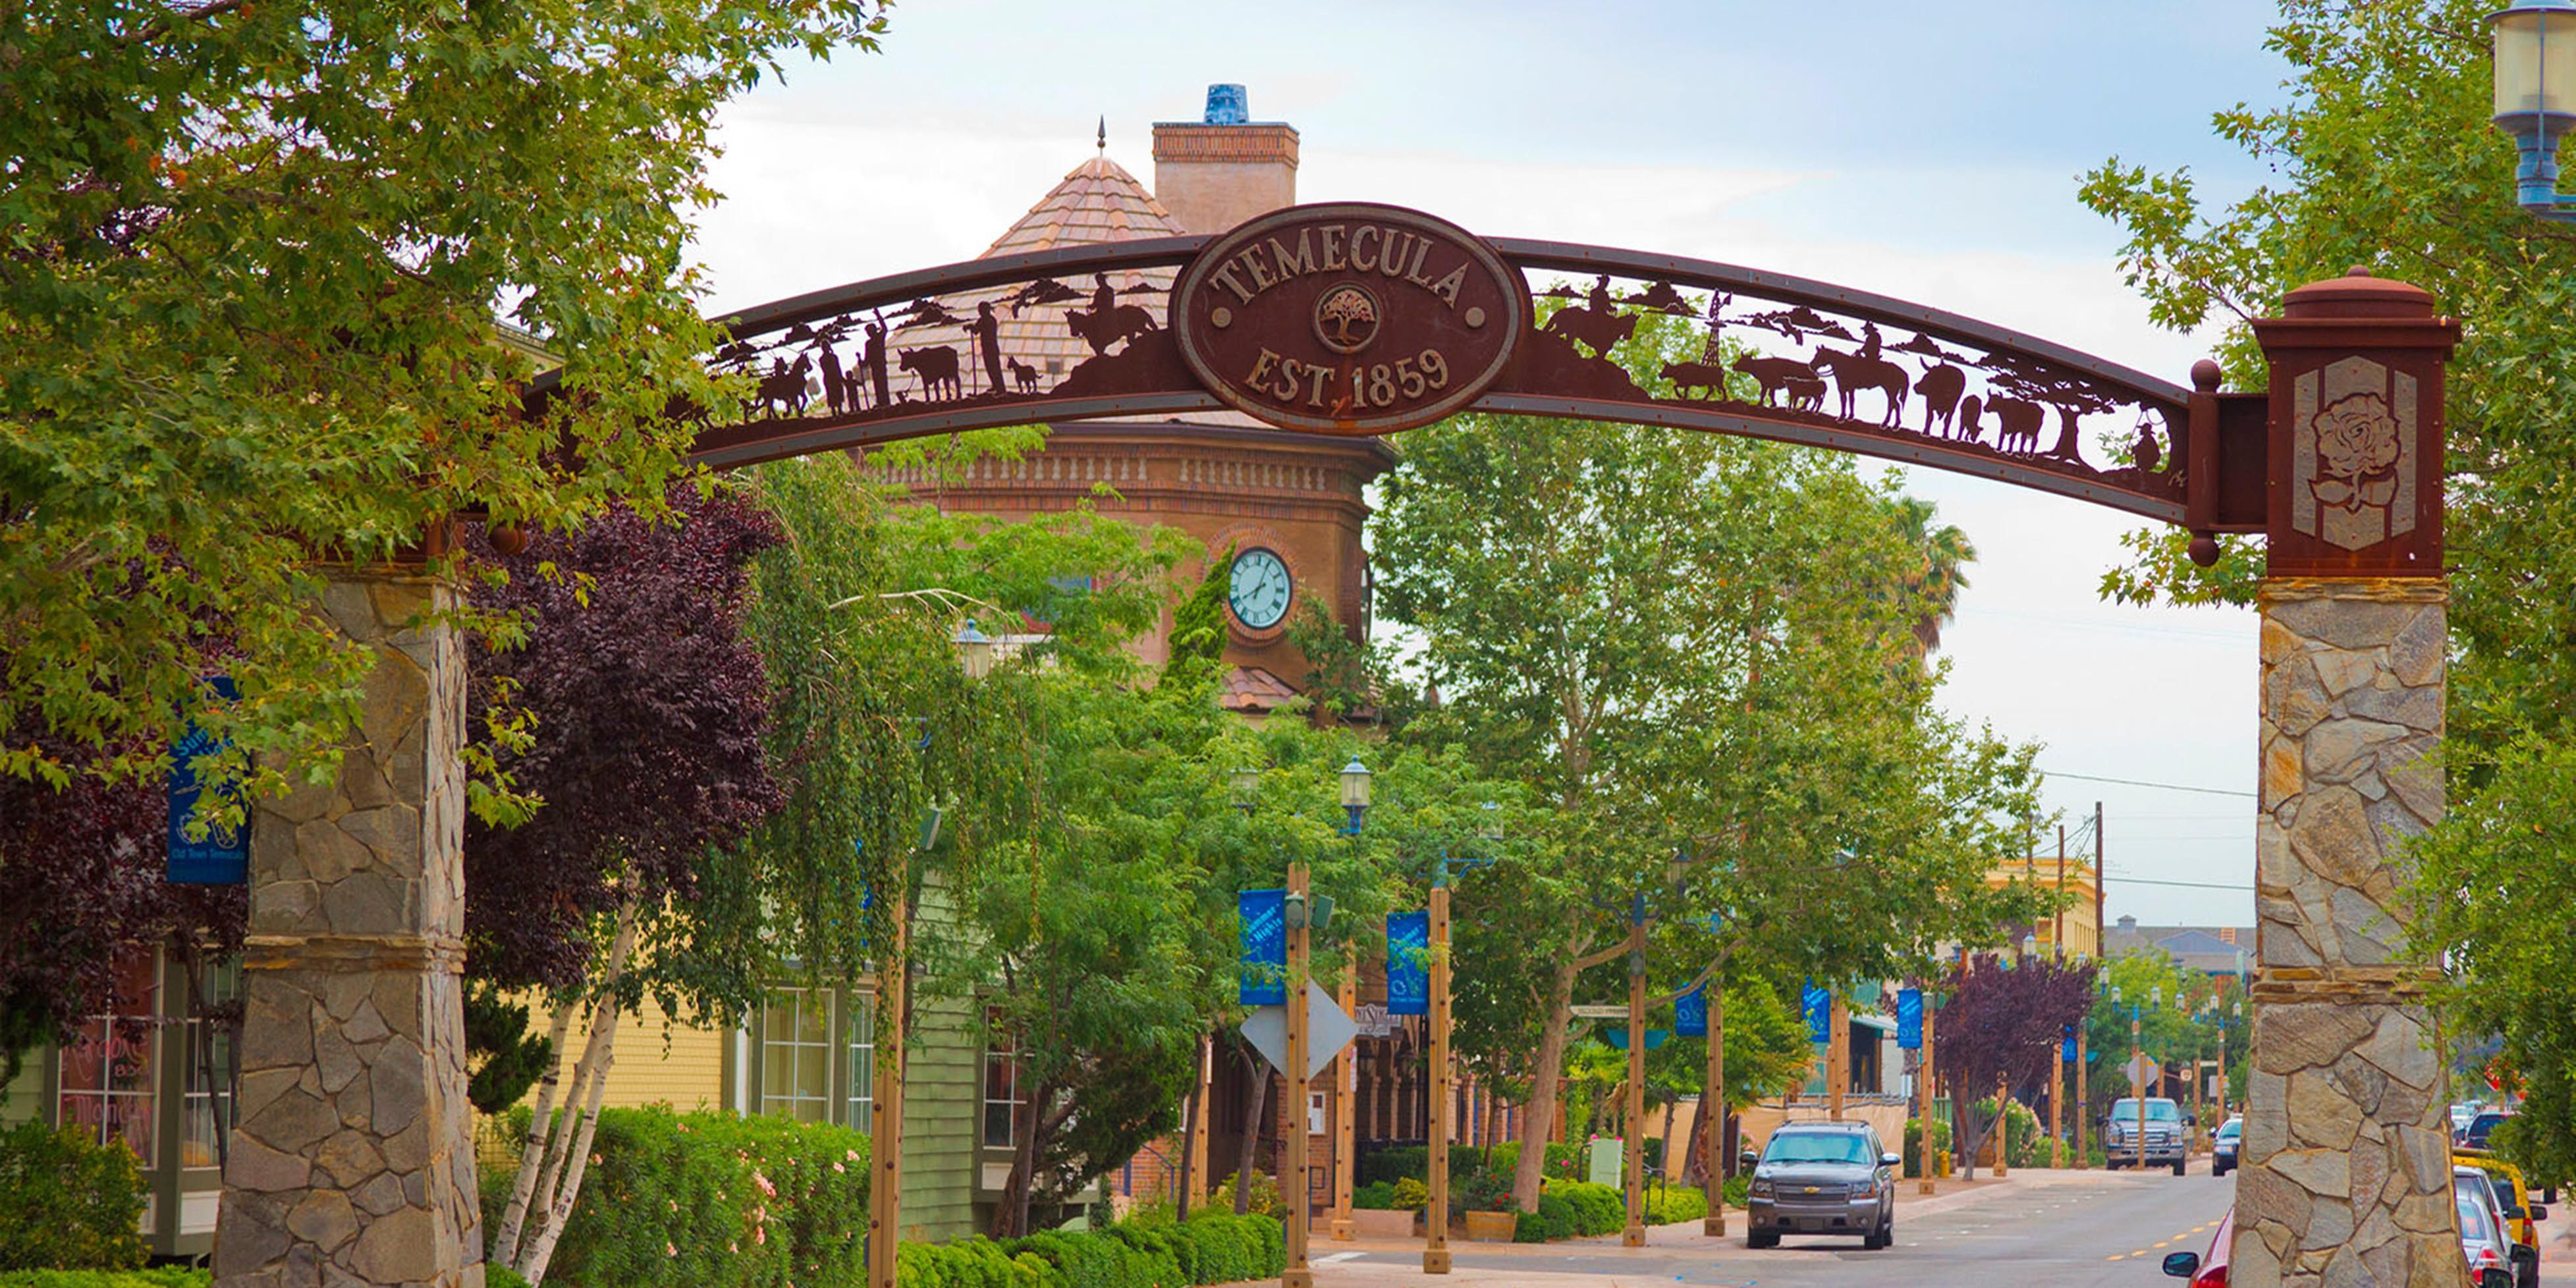 Come visit historic Old Town Temecula and it's unique blend of dining and shops.  You can grab a taste of local food and enjoy live music on the weekends.